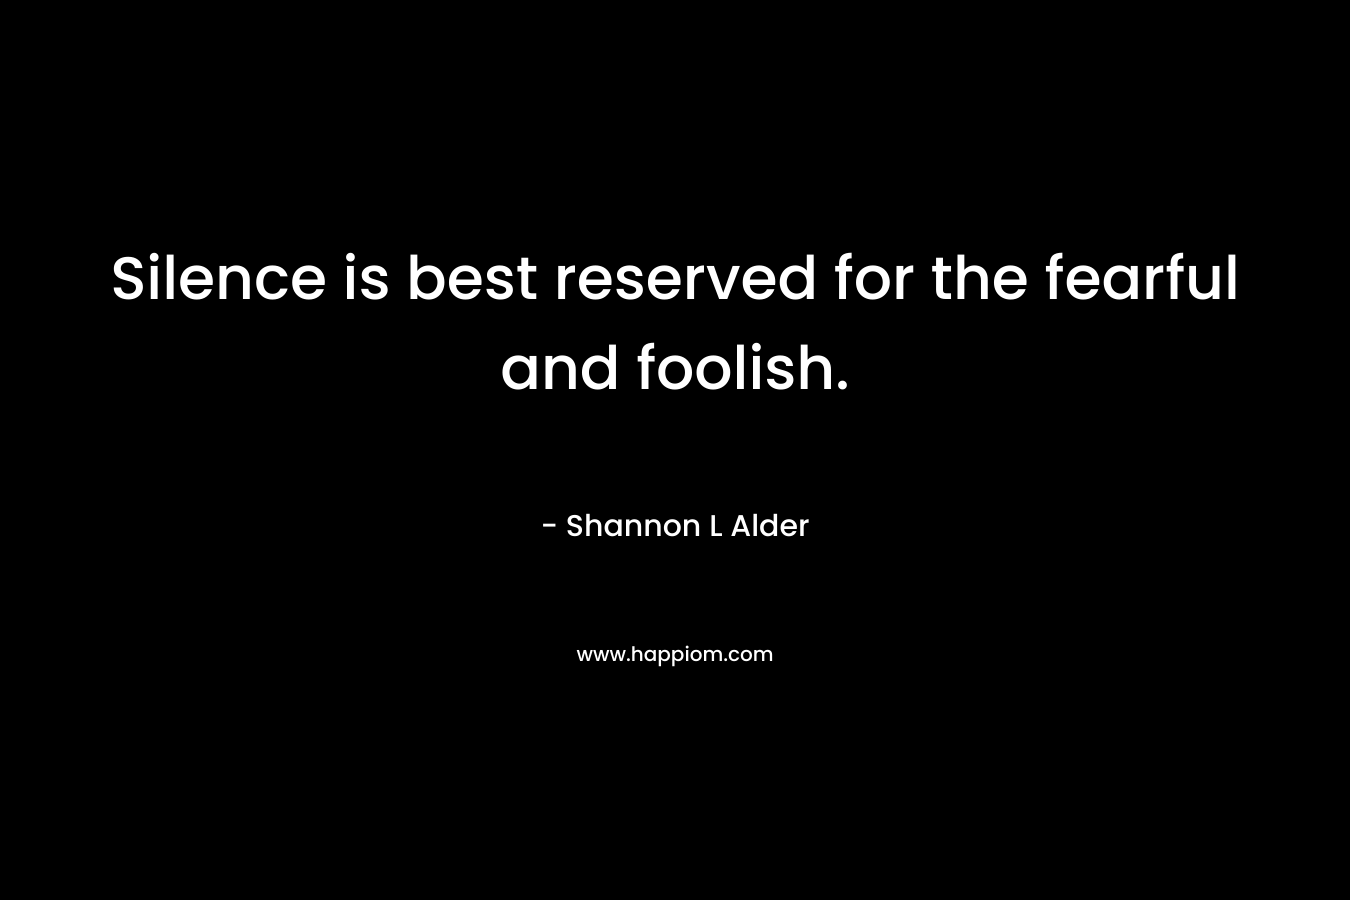 Silence is best reserved for the fearful and foolish.